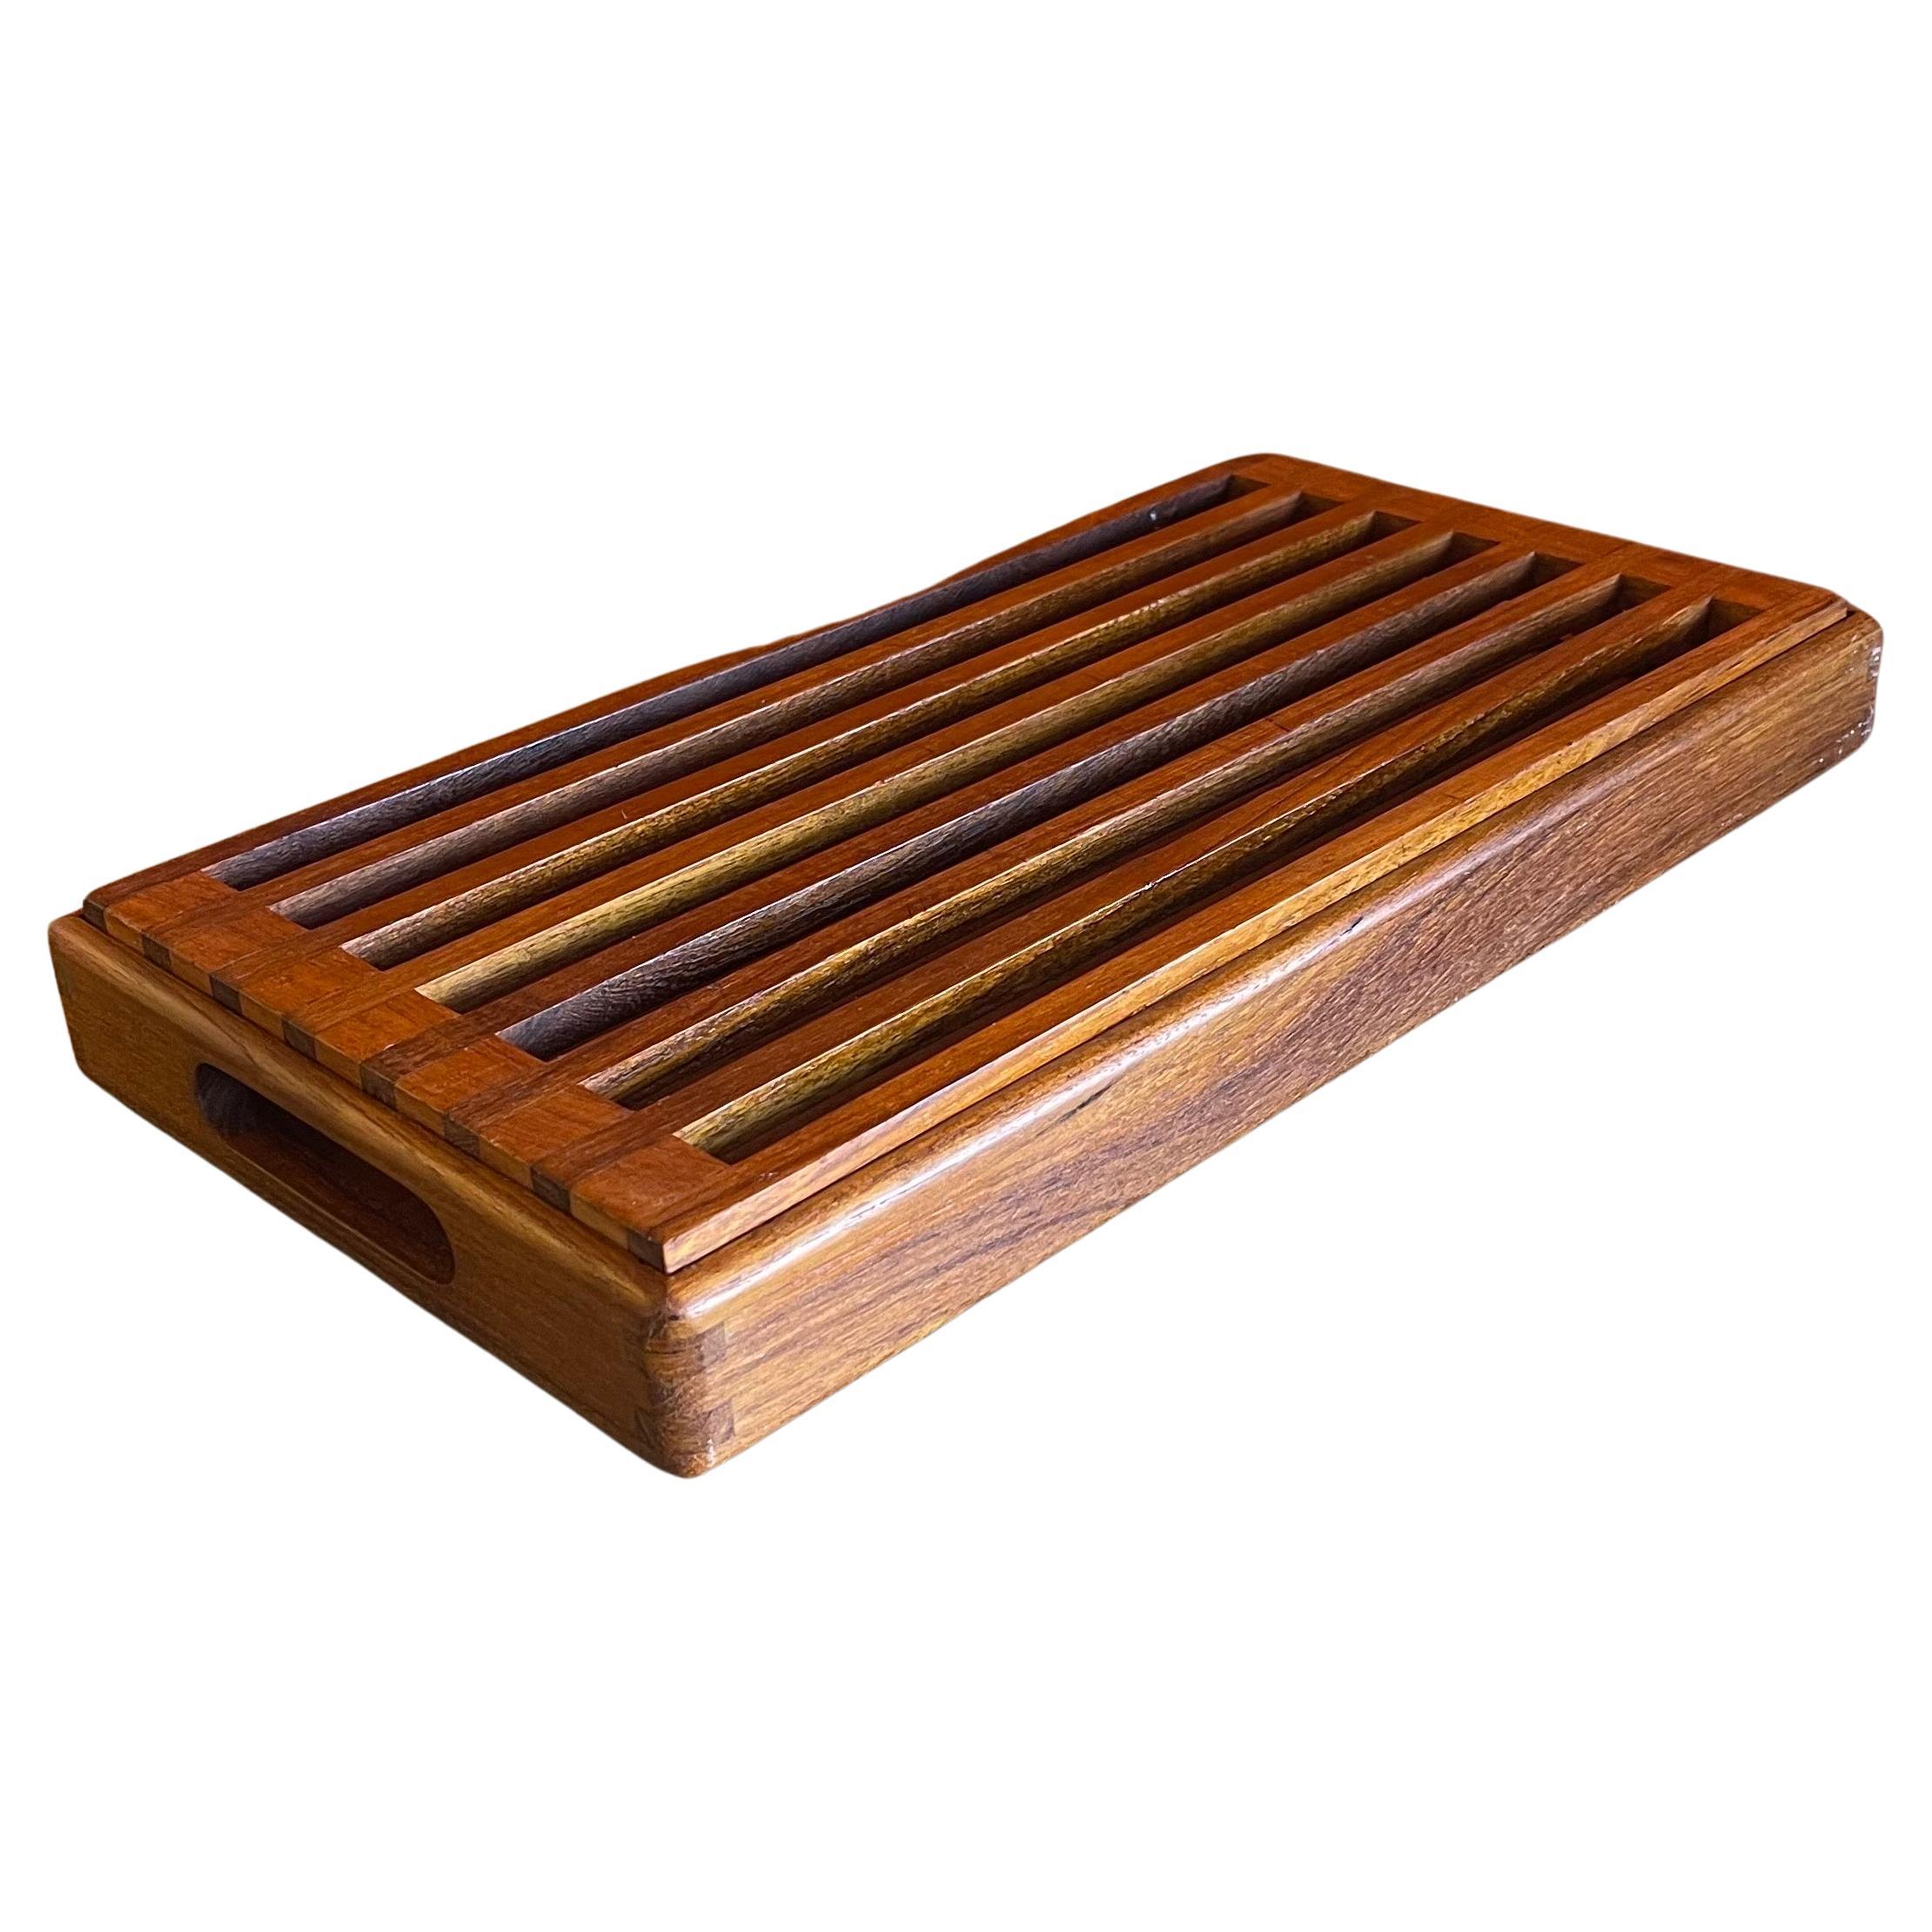 A very nice Danish modern teak bread cutting board with handles, circa 1970s. The board is in good vintage condition and measures 15.5